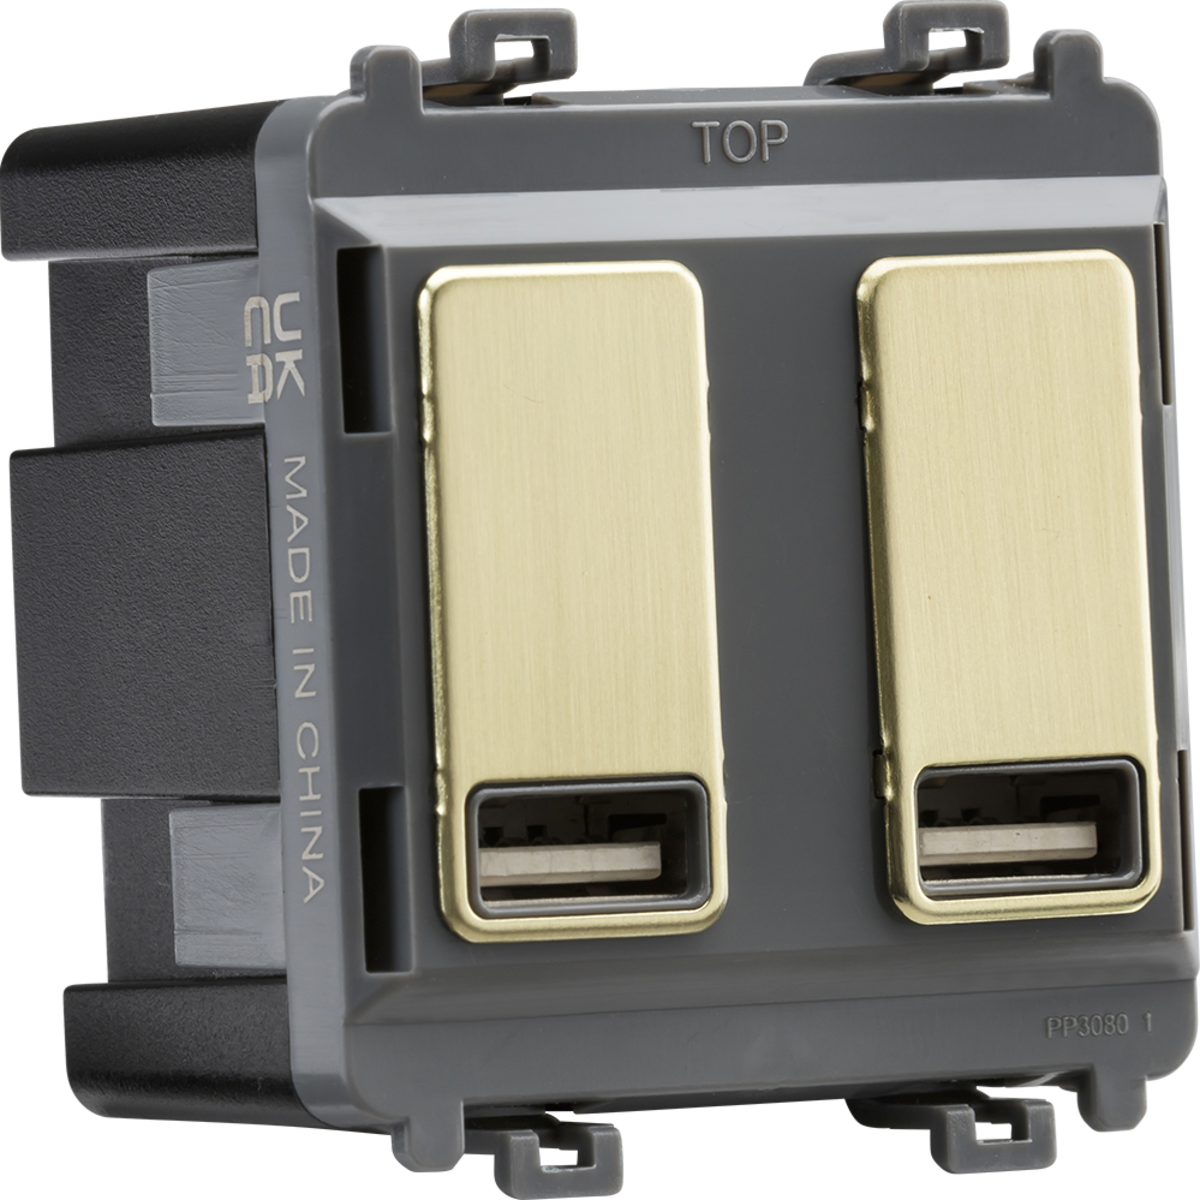 Knightsbridge Dual USB Charger Module (2 x Grid Positions) 5V 2.4A (Shared)